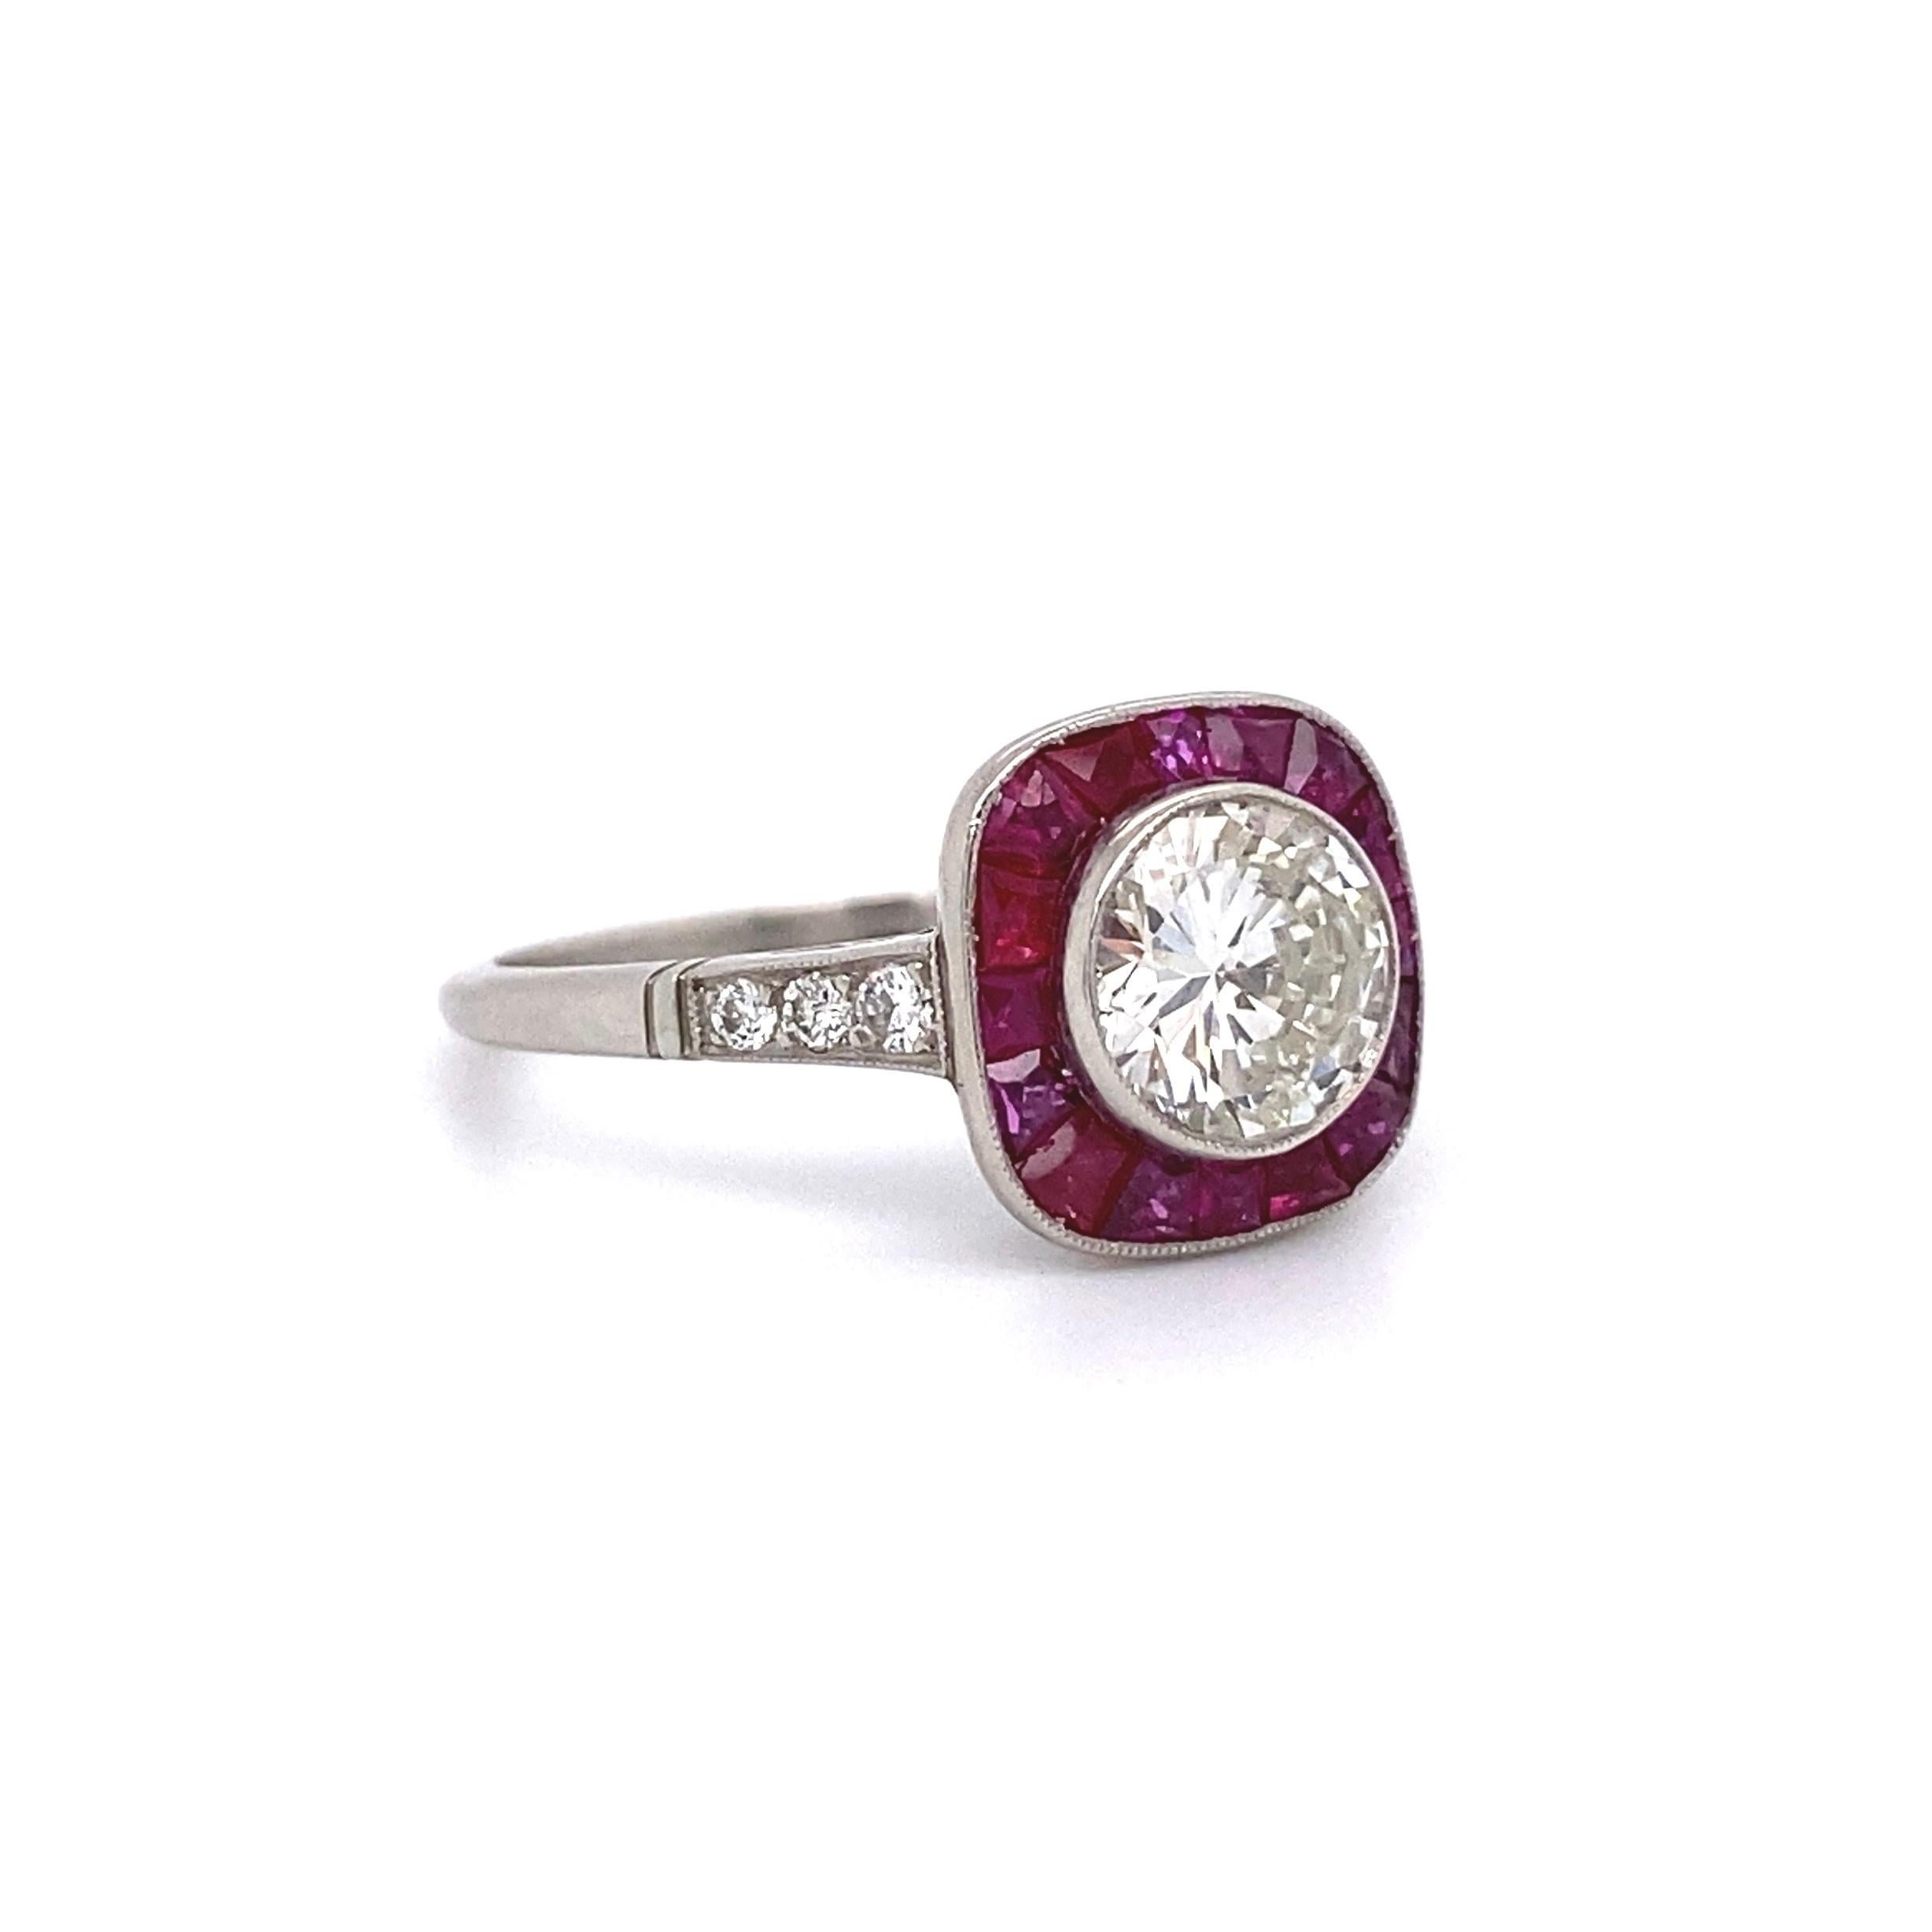 Mixed Cut Diamond and Rubies Platinum Halo Art Deco Style Ring Estate Fine Jewelry